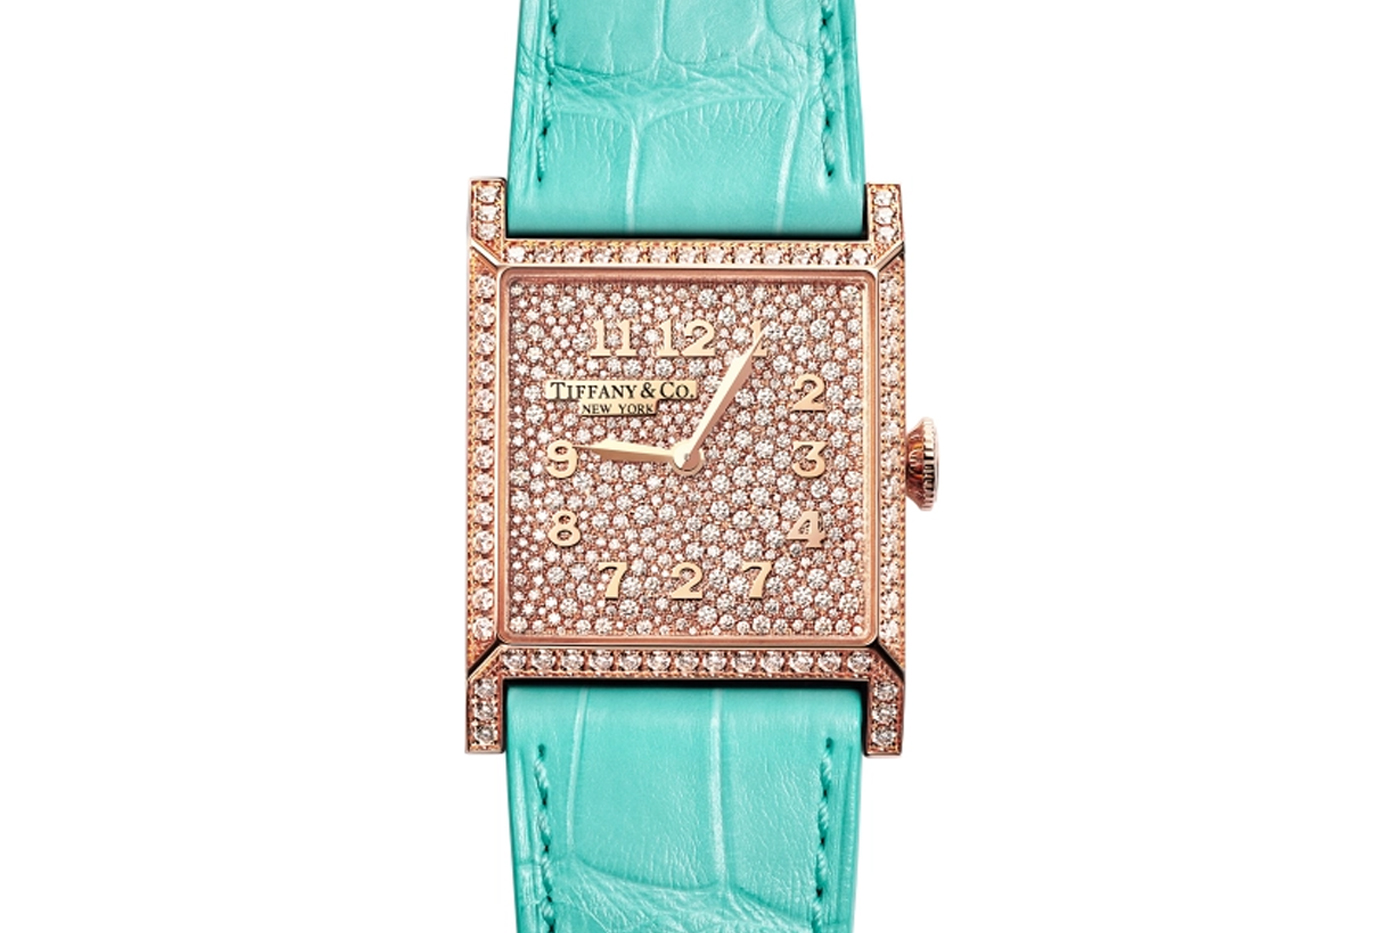 Tiffany & Co. Reveals Four New Limited-Edition Luxury Watches Union Square Limited Editions tiffany blue crocodile leather strap rose gold pave diamonds sapphire crystal casebacks limited to 100 pieces each 